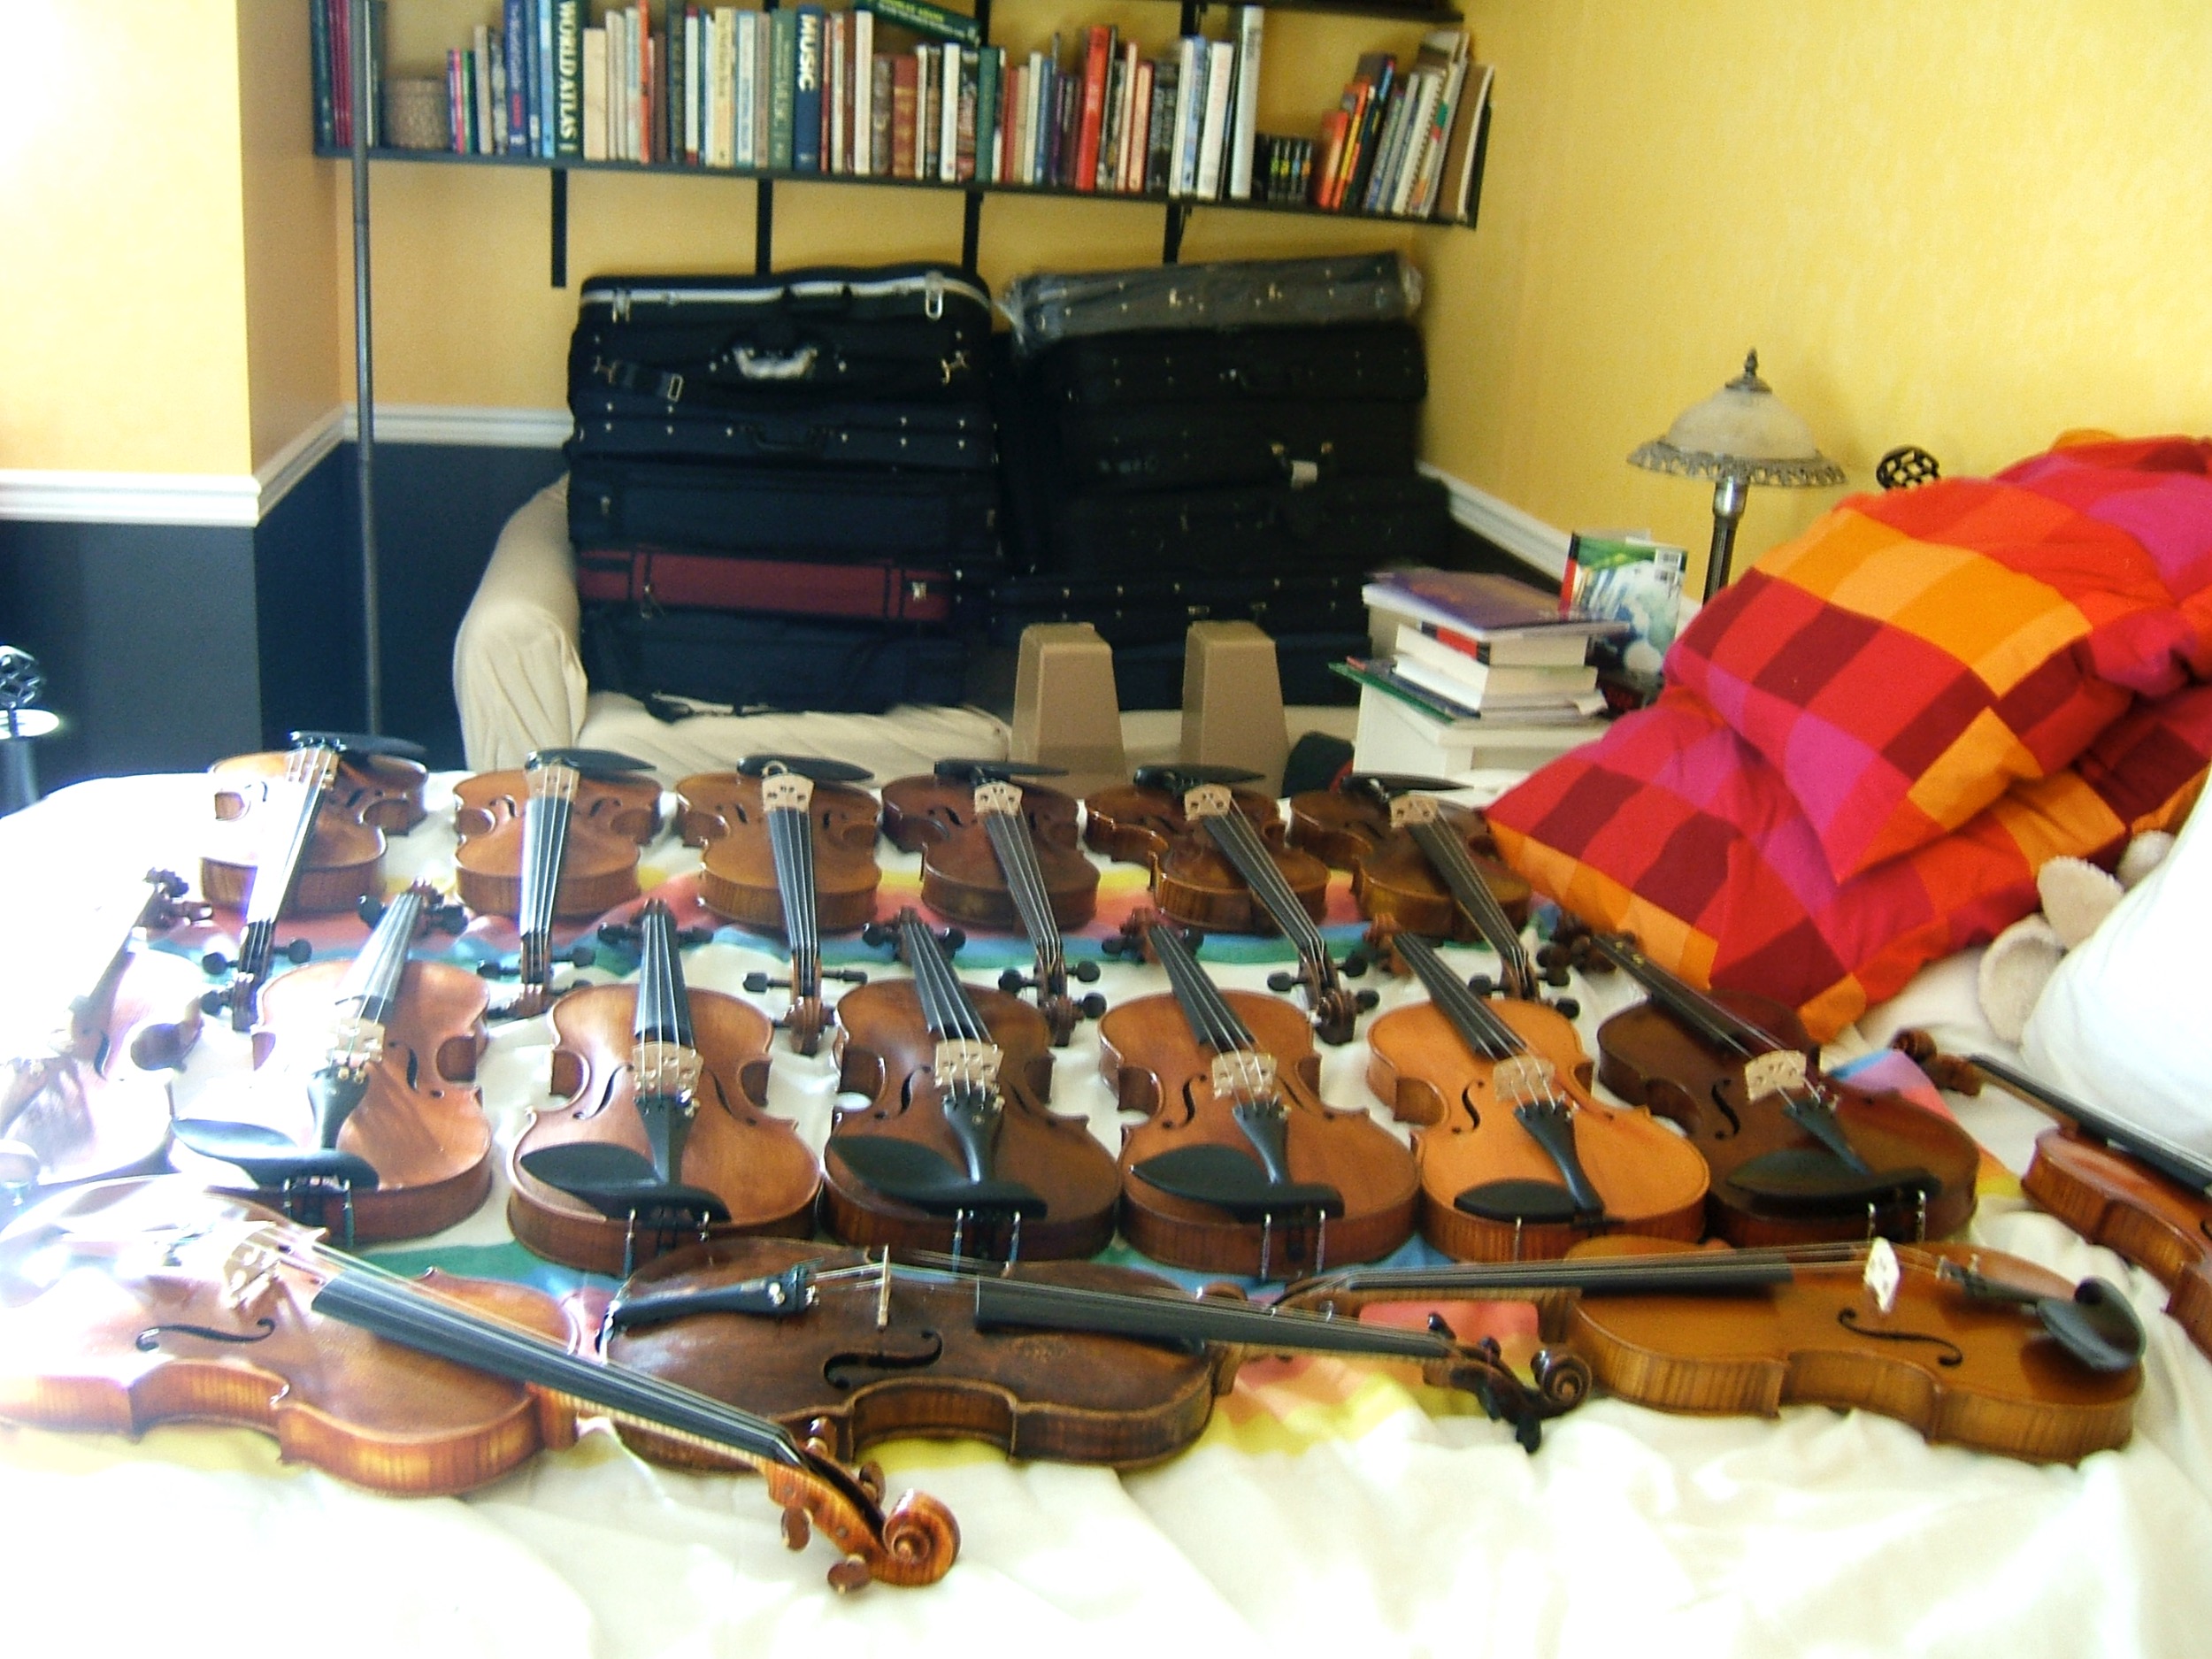 Violins and cases laid out over a bed and couch, taking up every inch of space